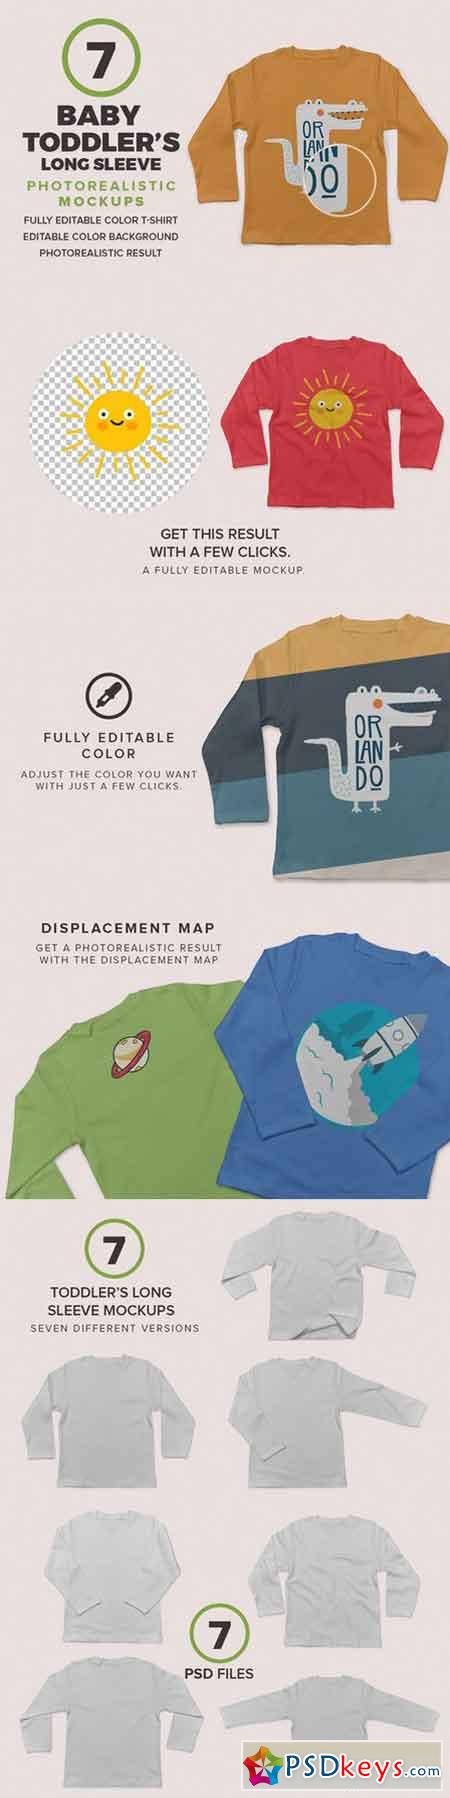 Download Apparel Free Download Photoshop Vector Stock Image Via Torrent Zippyshare From Psdkeys Com Page 2 Chan 60353361 Rssing Com Yellowimages Mockups